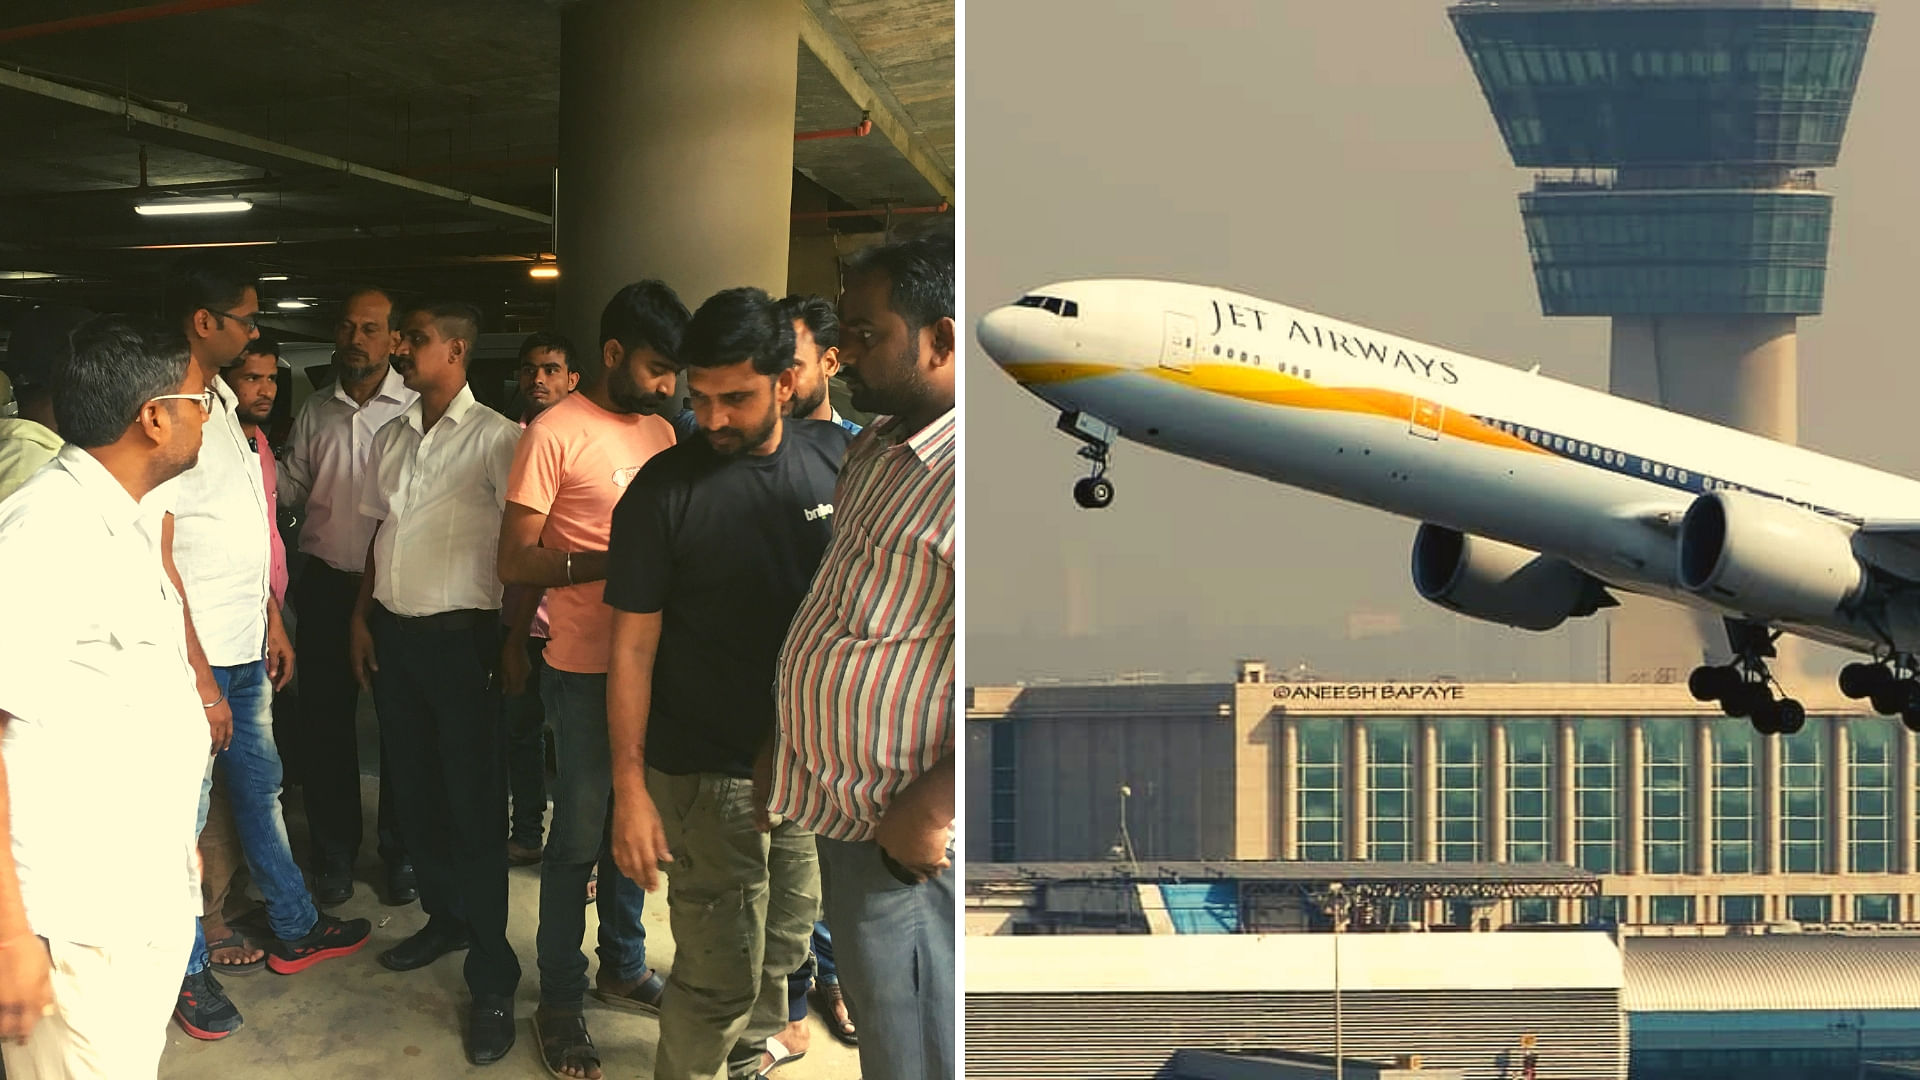 Vendors have been refusing to release cars rented by Jet Airways to transport crew members for a week now due to unpaid dues.